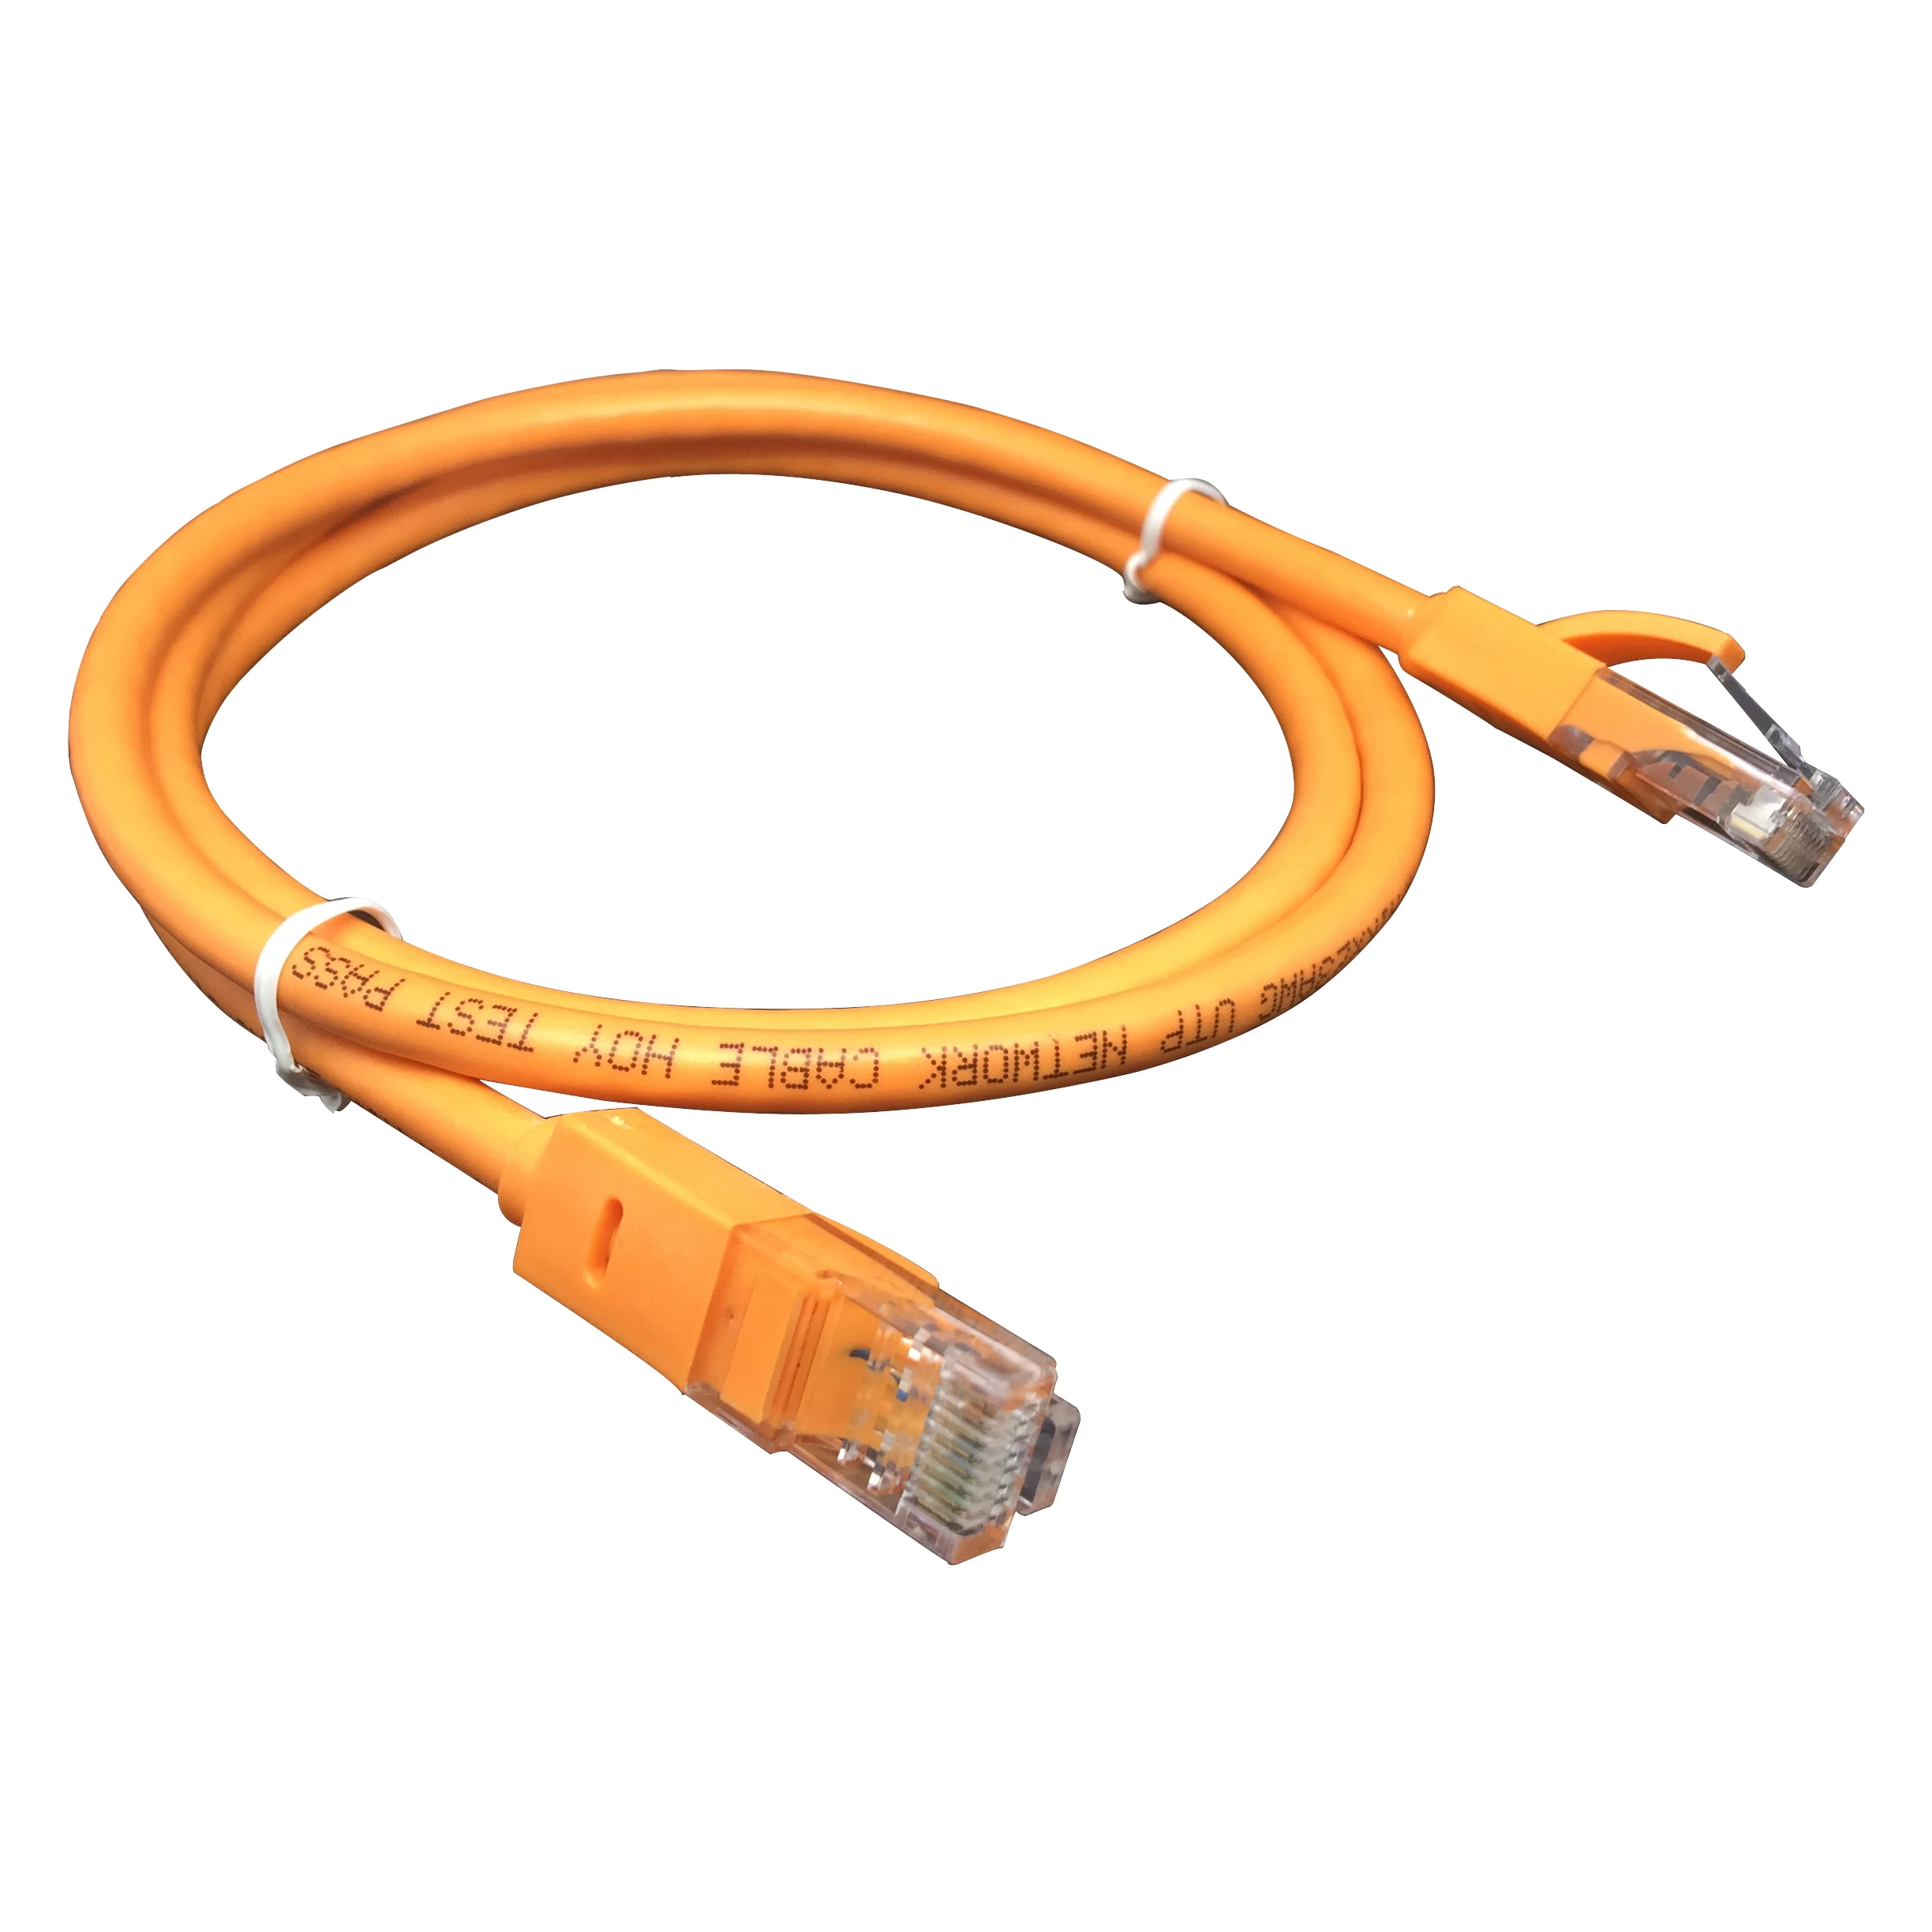 

Ethernet Cable Cat6 Lan Cable UTP CAT 6 RJ 45 Network Cable 1m 2m 3m for Laptop Router Round cable